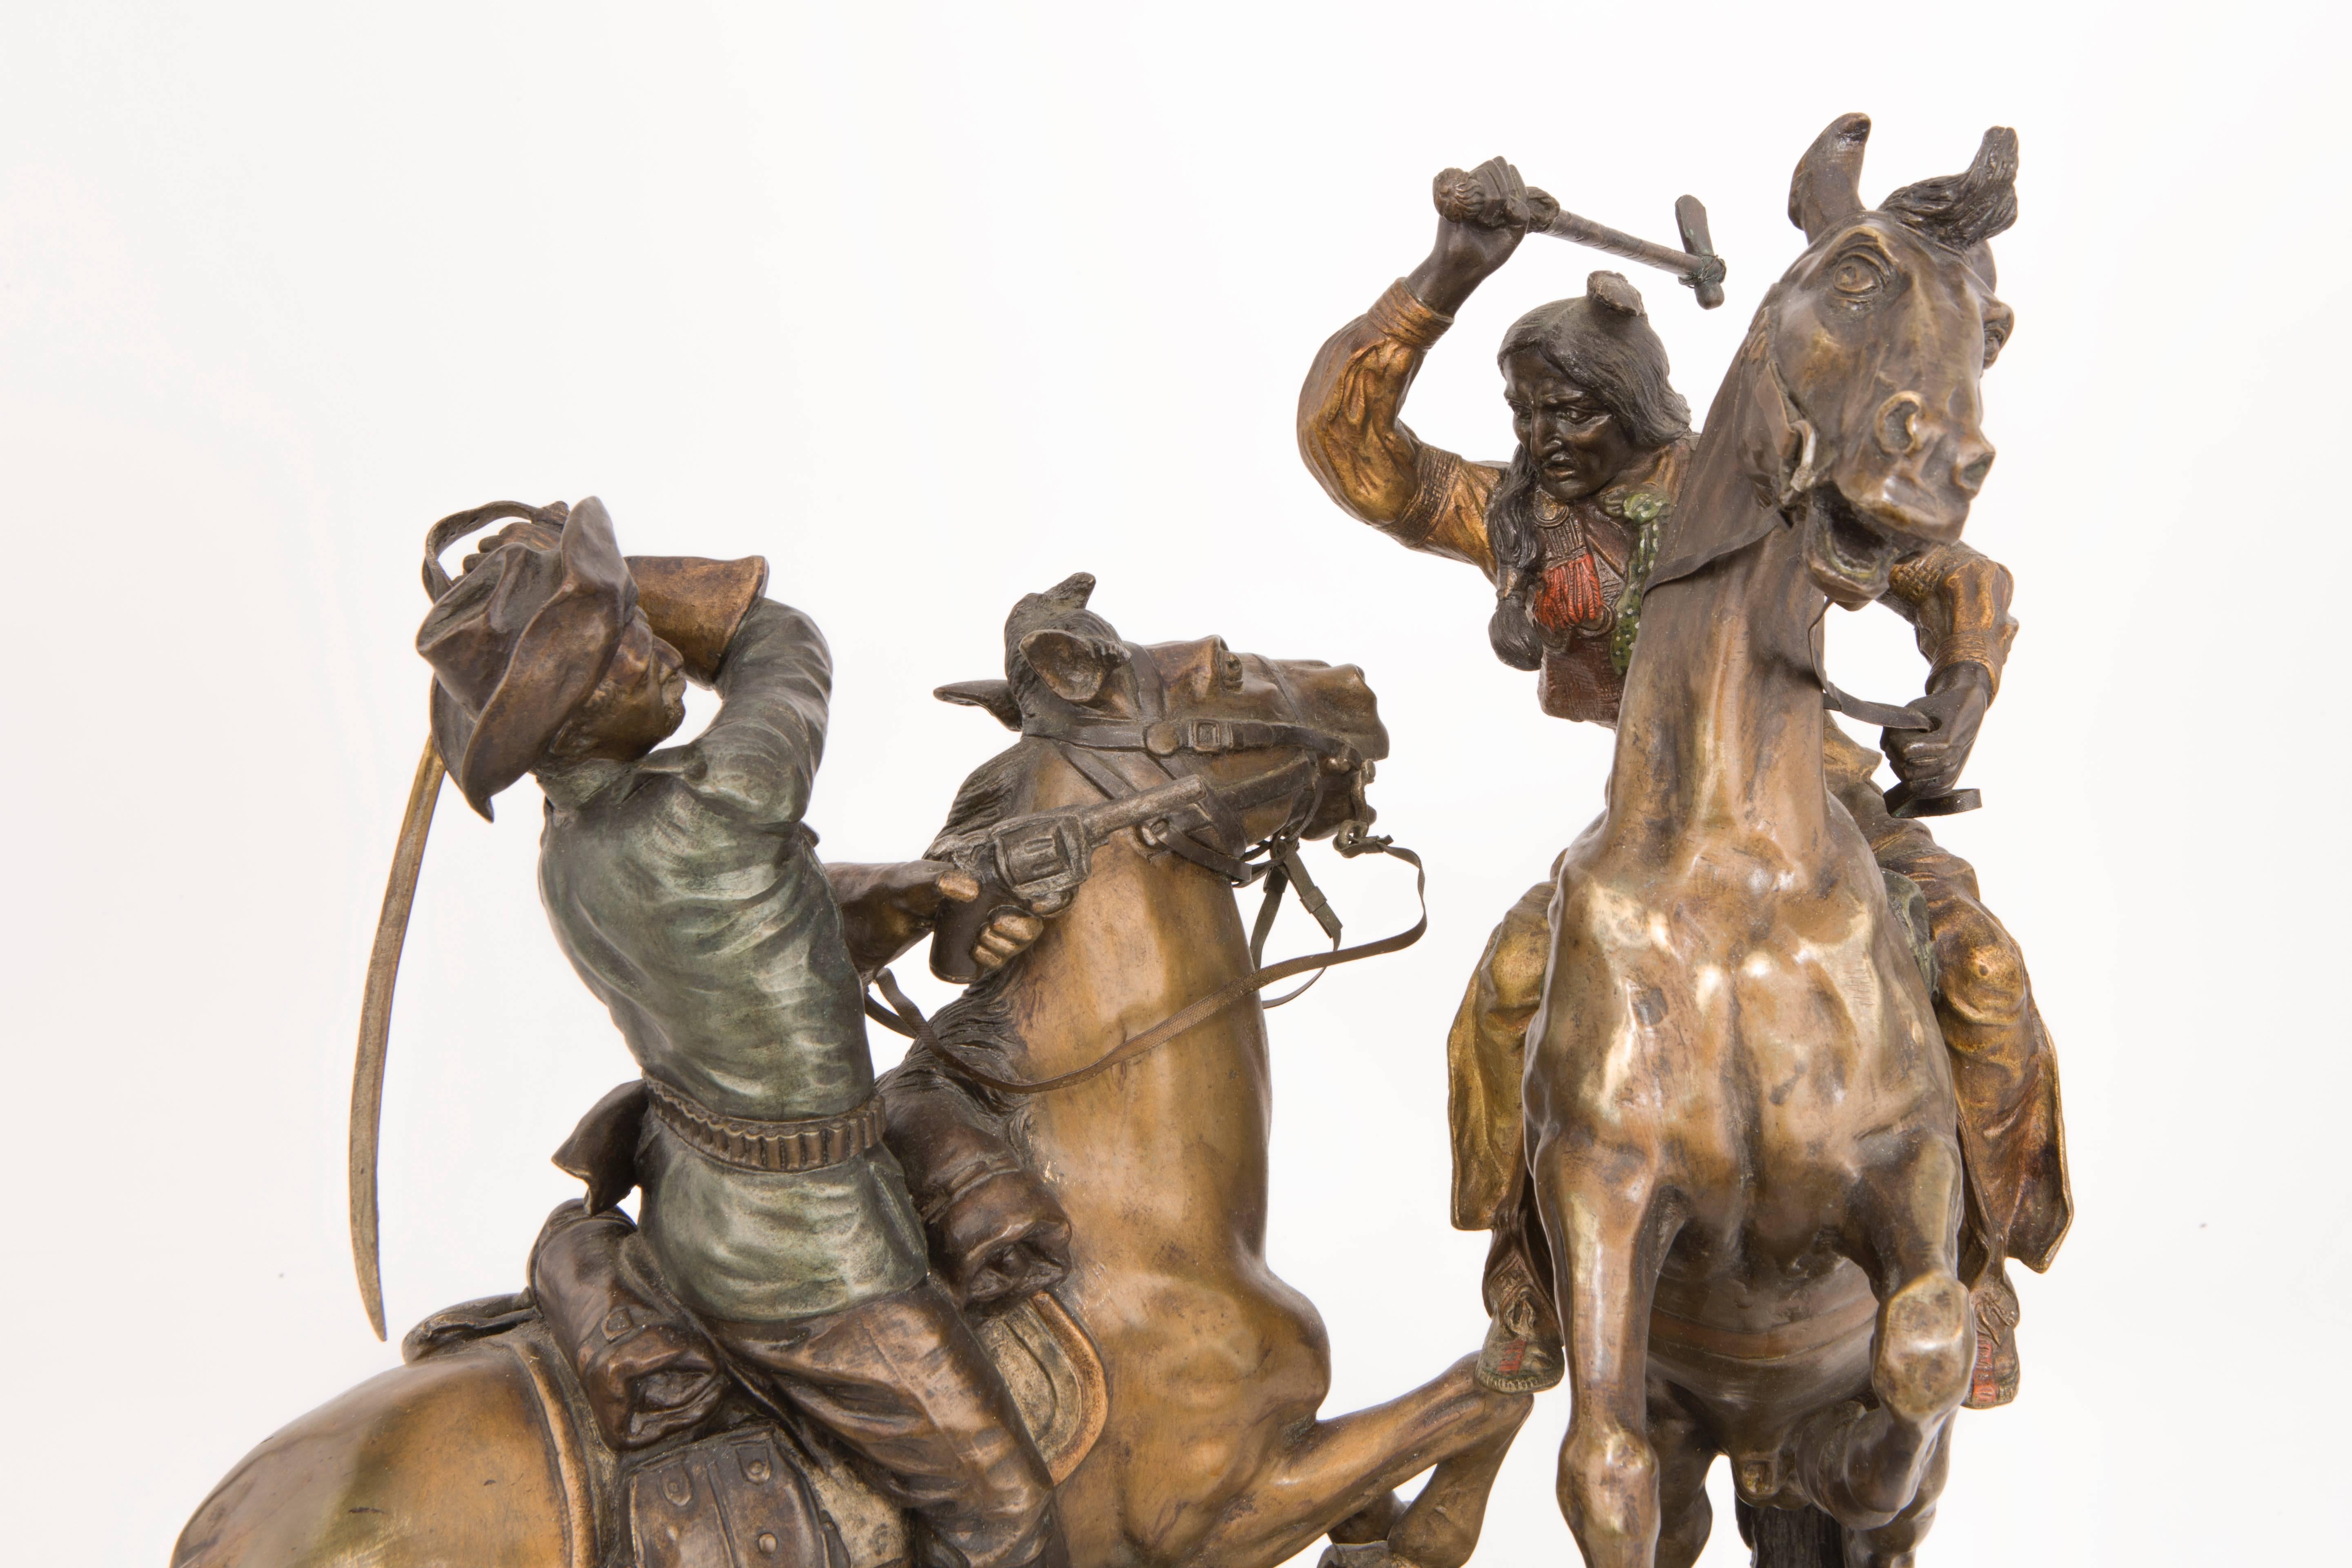 An amazing early 20th century Austrian polychromed and patinated bronze sculpture depicting there American Wild West of a Cowboy with a sword and drawn gun on Horseback attacking an Indian on Horseback with hatchet in hand by, Austrian sculptor Carl